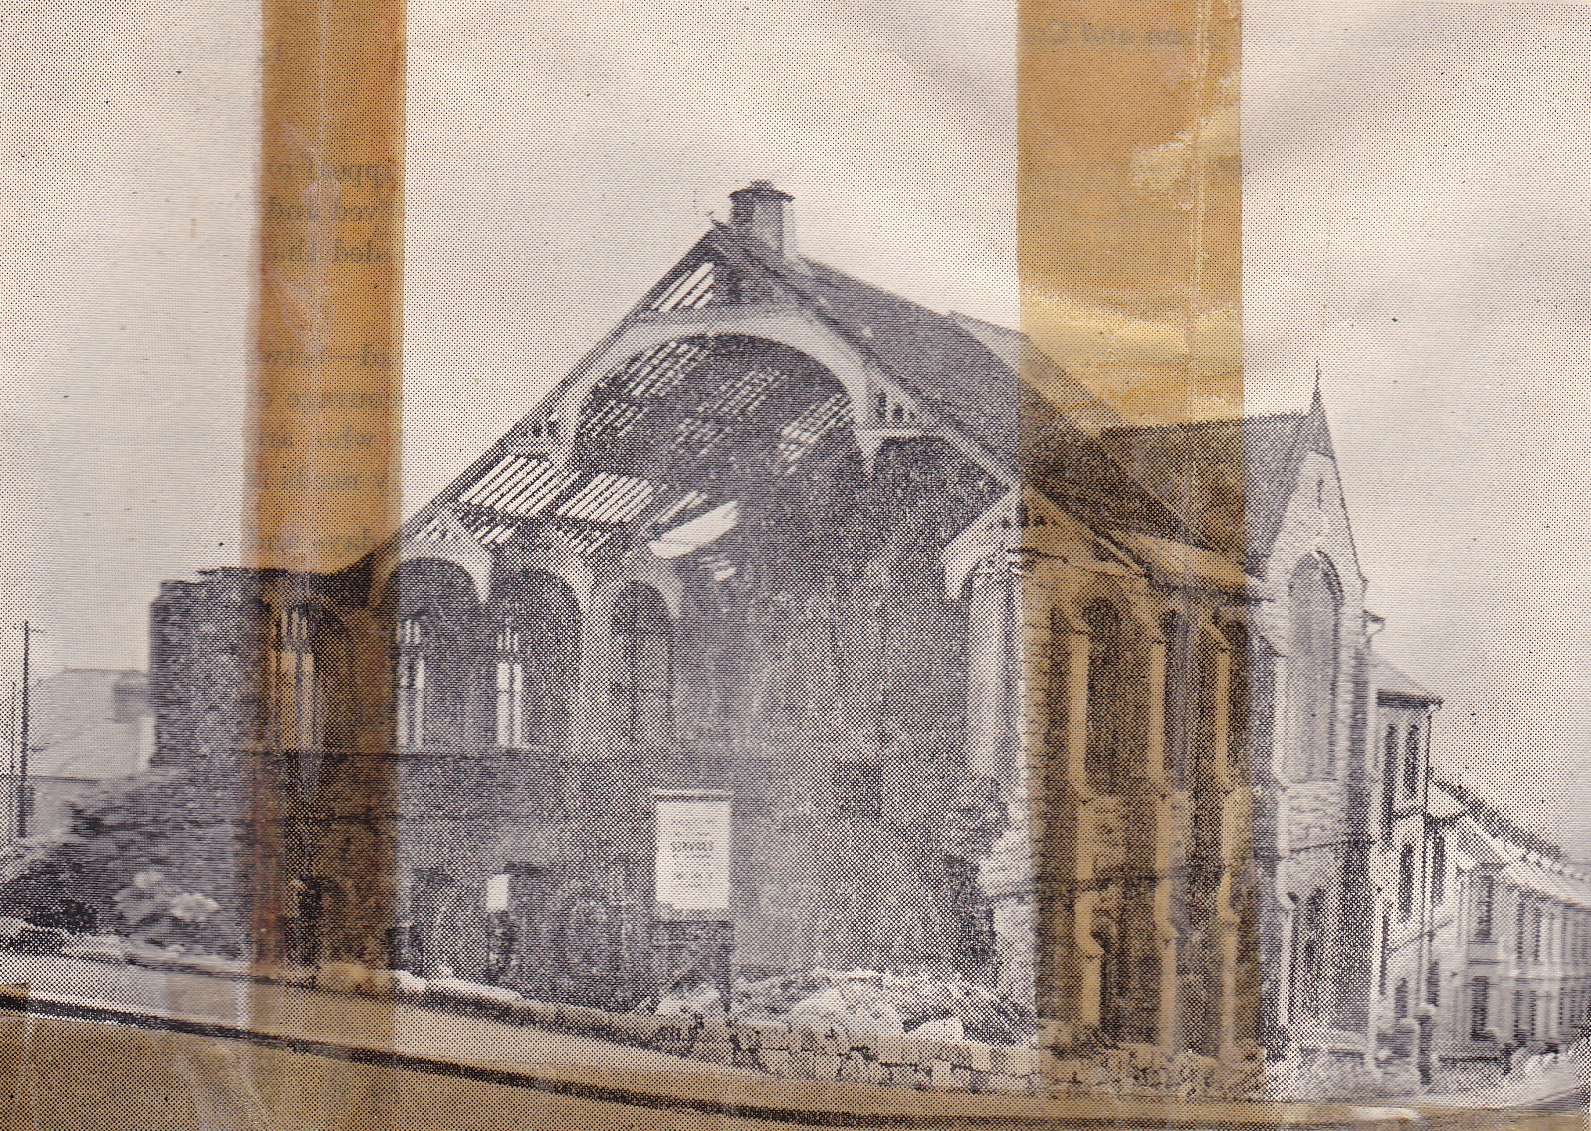 The Church After Being Hit by a Bomb in 1943